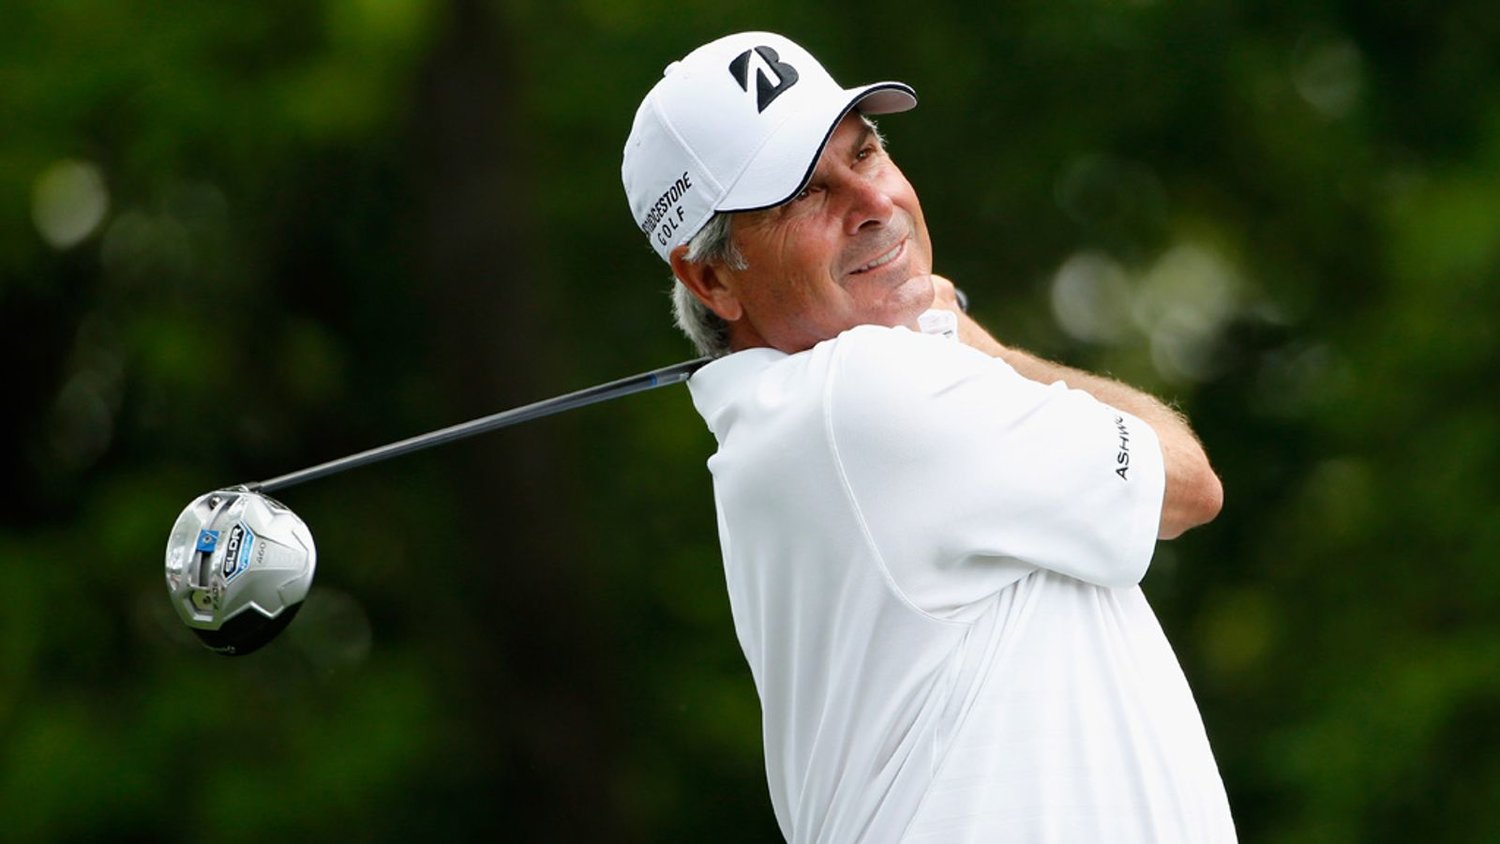 PGA Professional Fred Couples producing a winning golf shot.